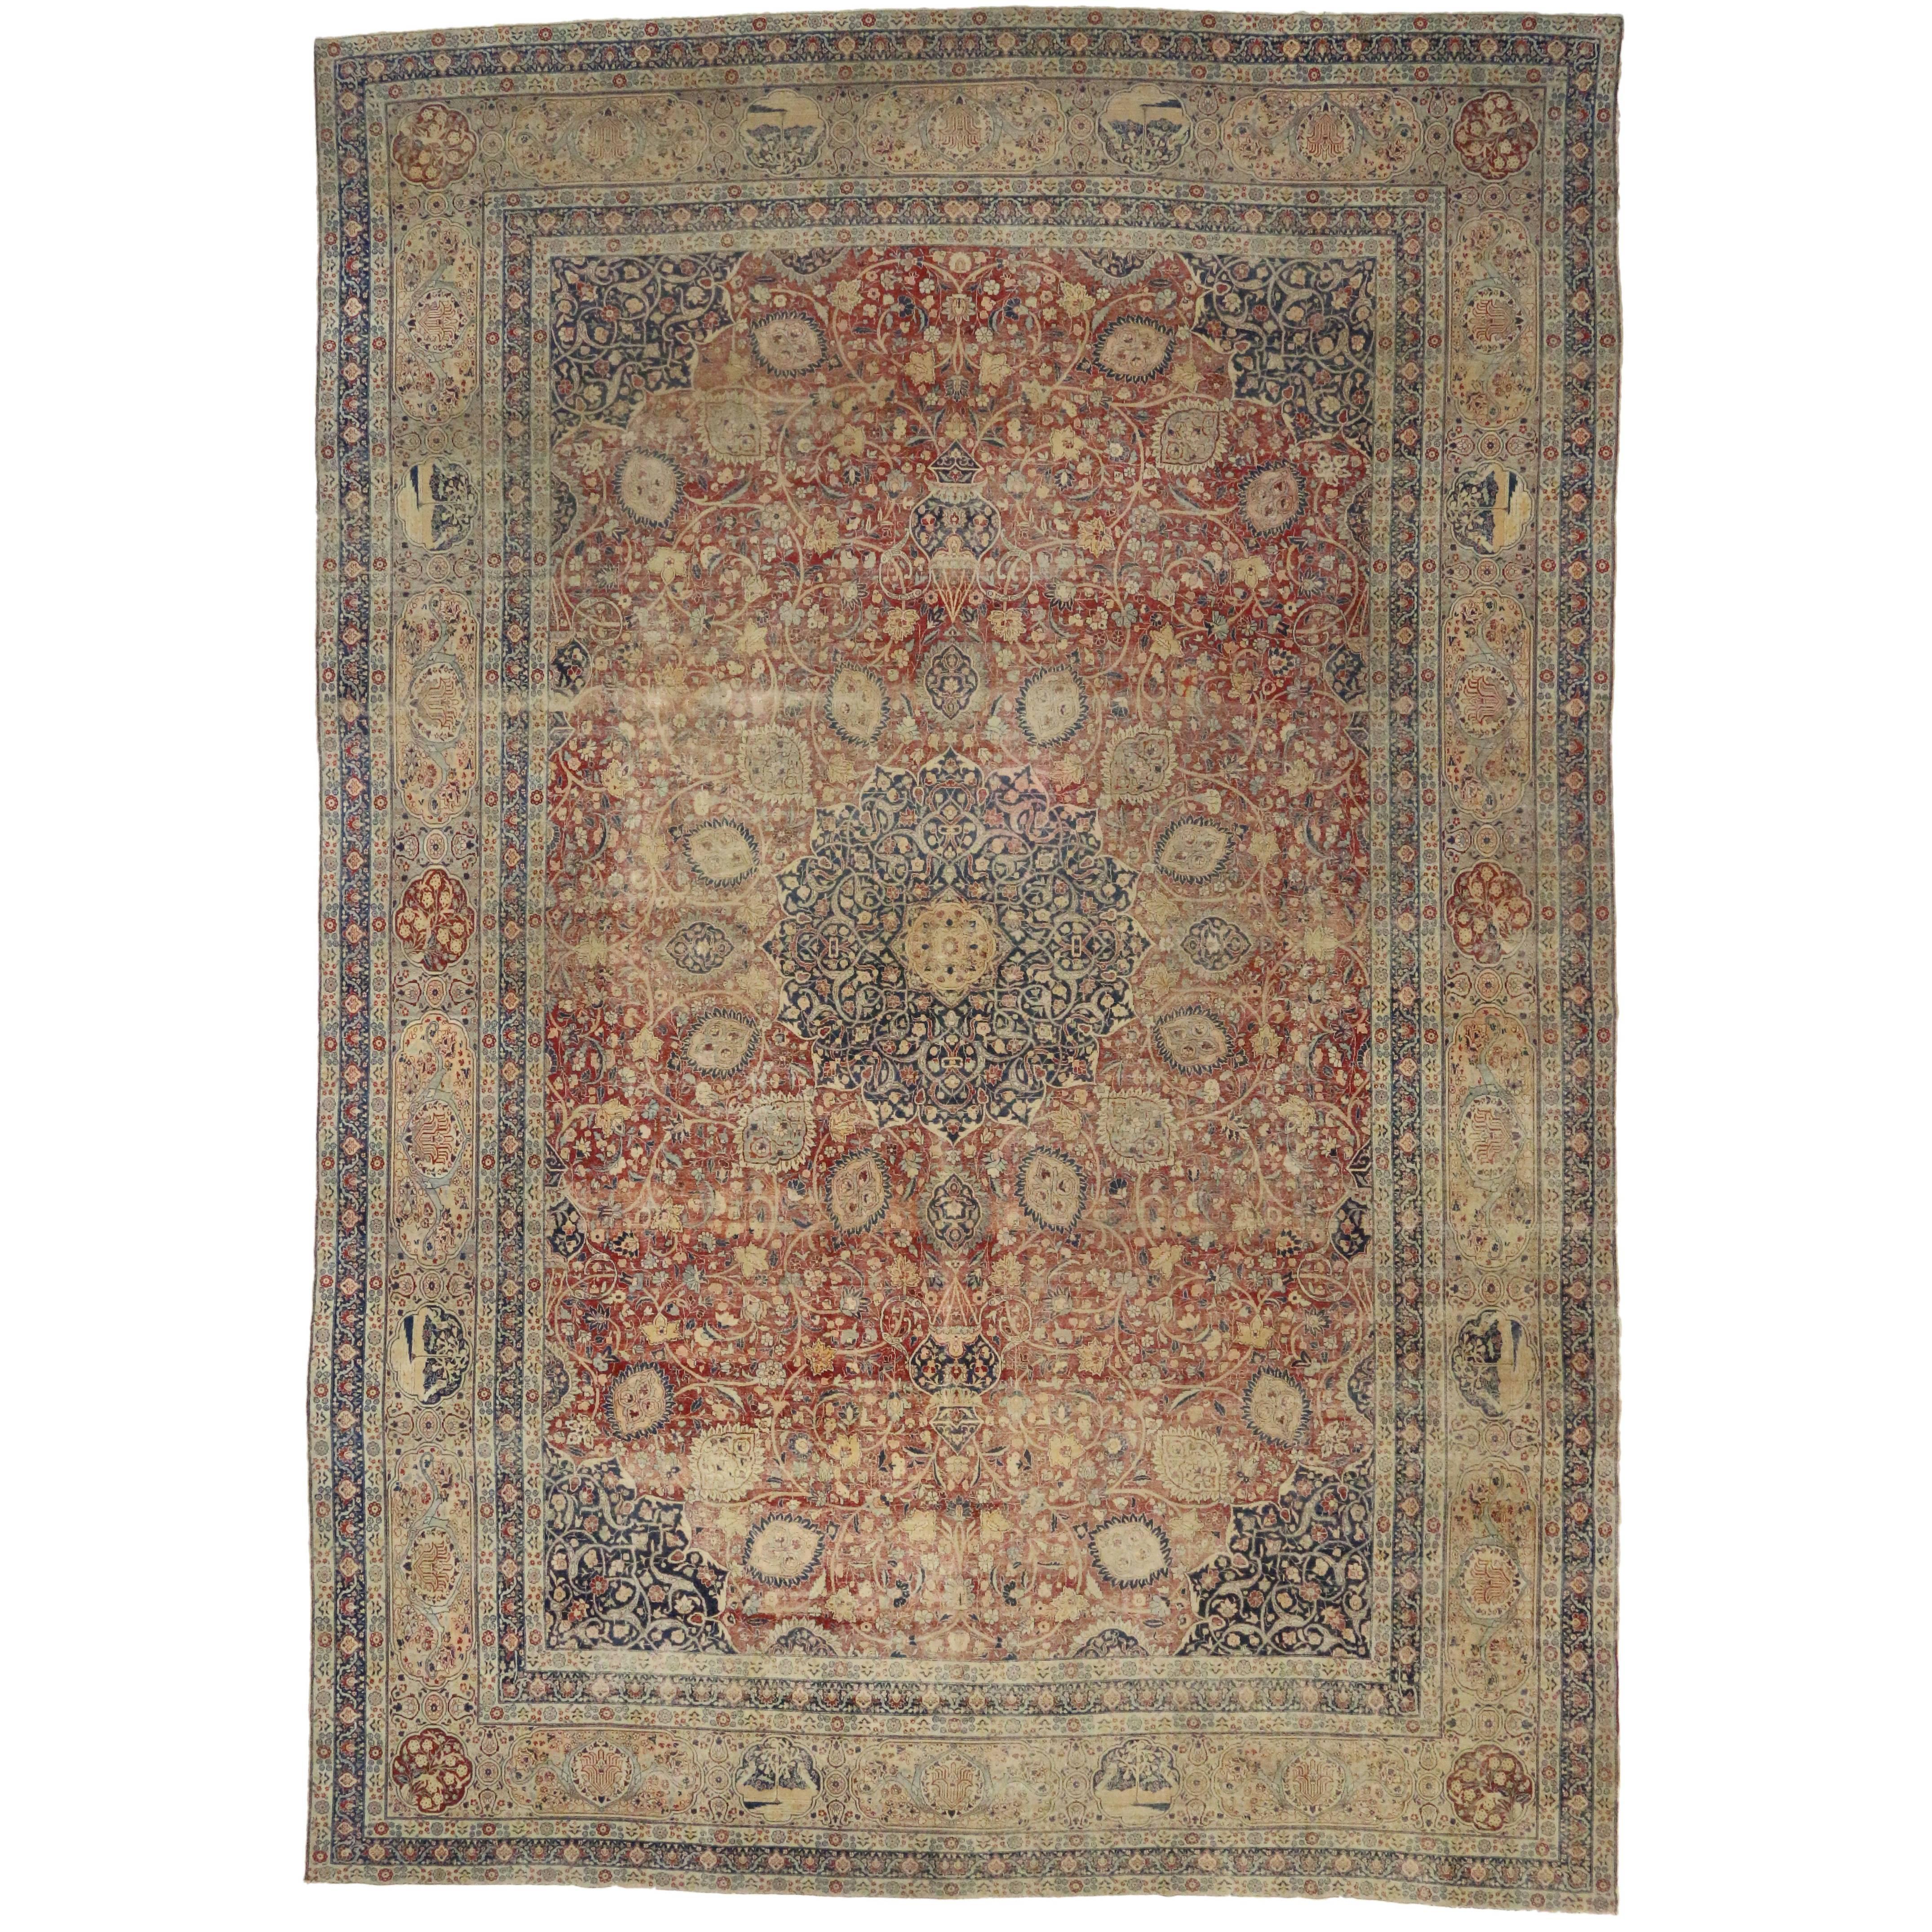 Distressed Antique Persian Tabriz Palace Rug with Rustic Relaxed Federal Style